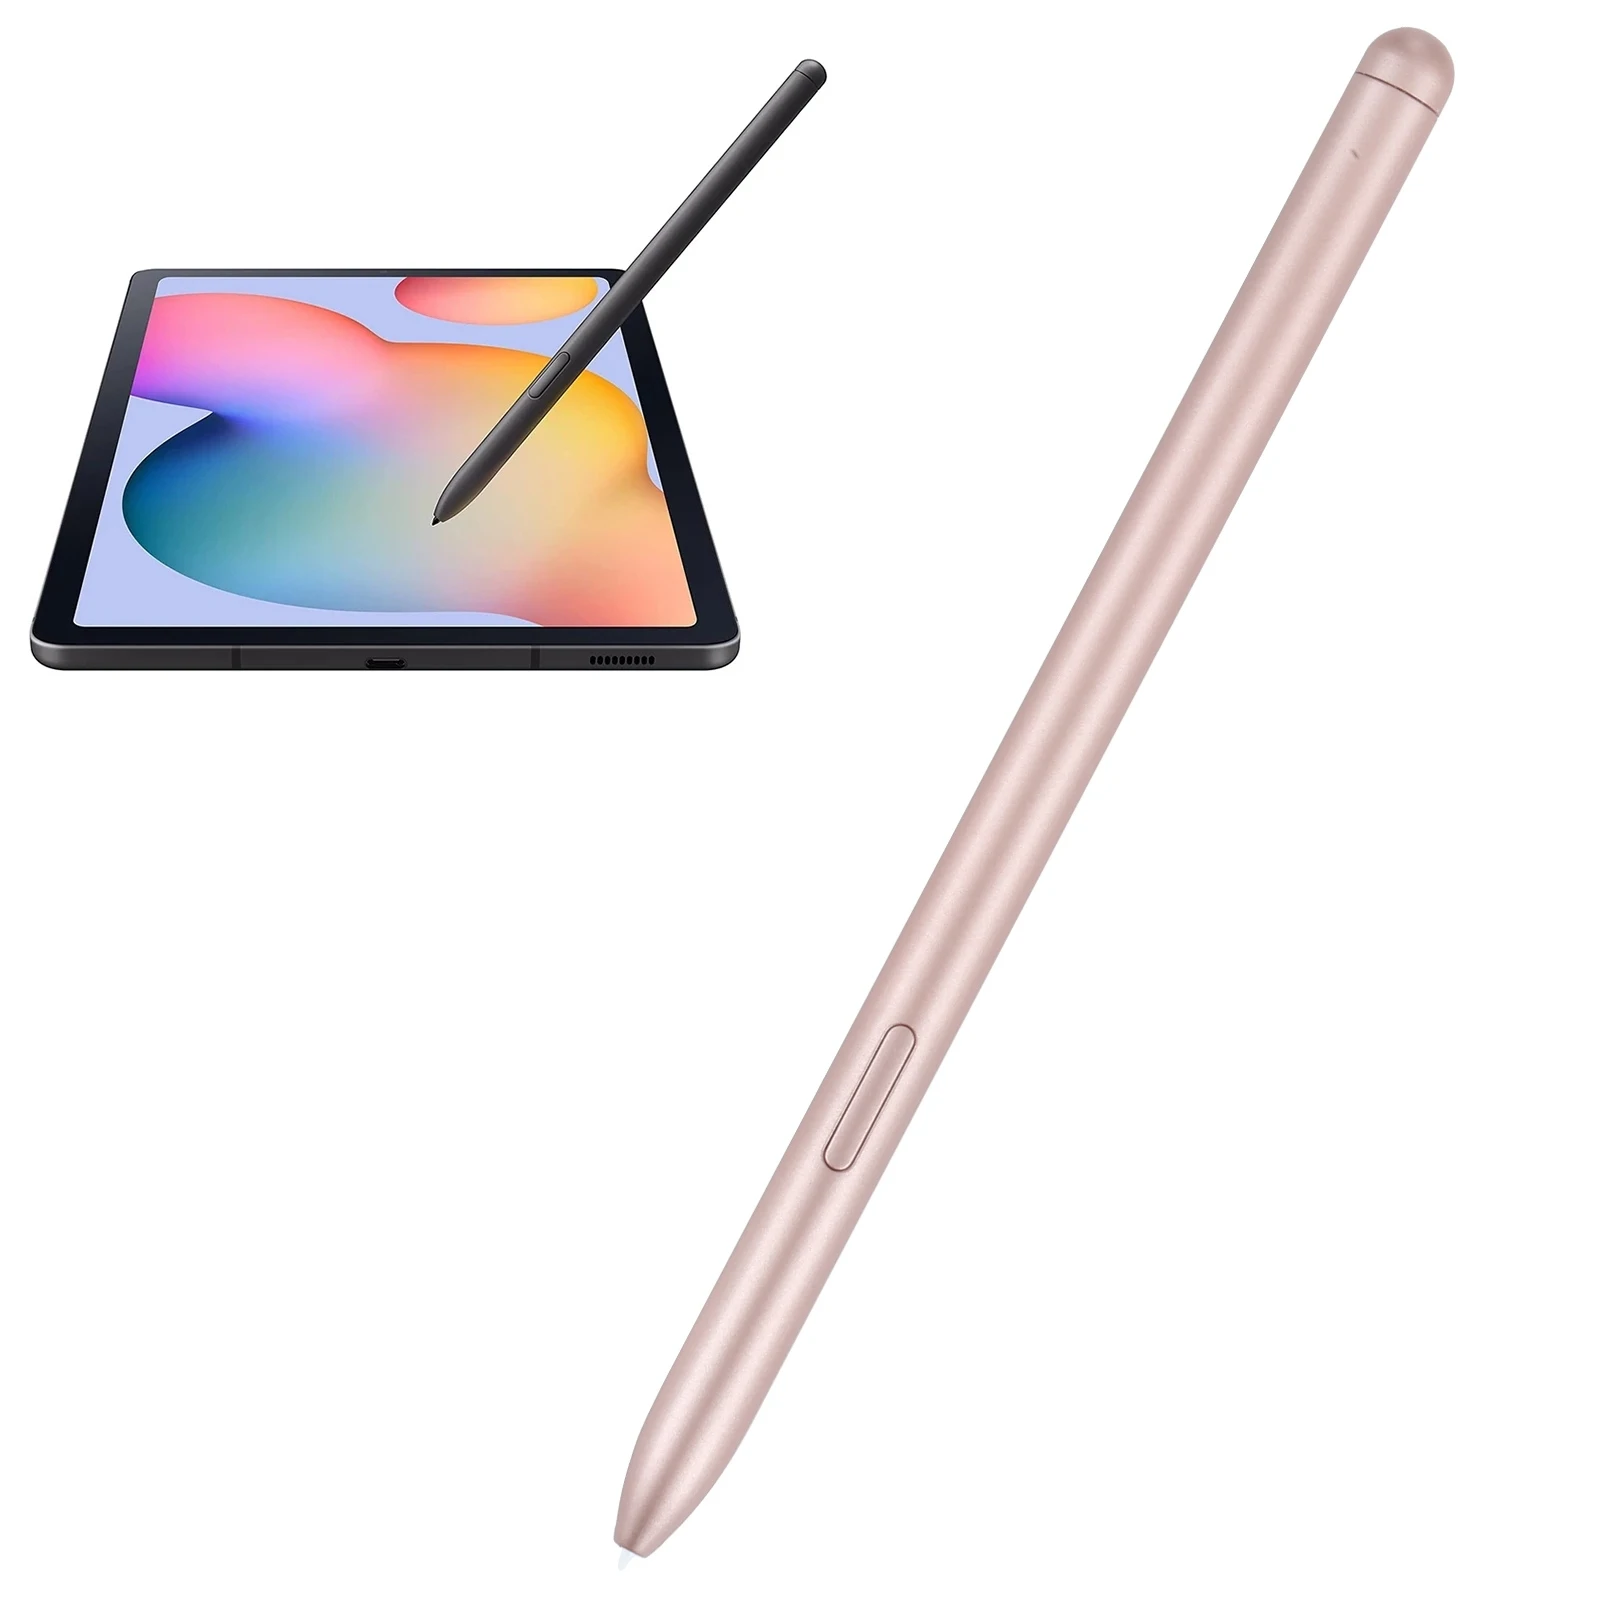 

High Sensitivity Stylus Pen for Samsung Galaxy Tab S6 lite/S7/S7+/S7 FE/S8/S8+/S8 Ultra Tablet Stylus Pen Replacement